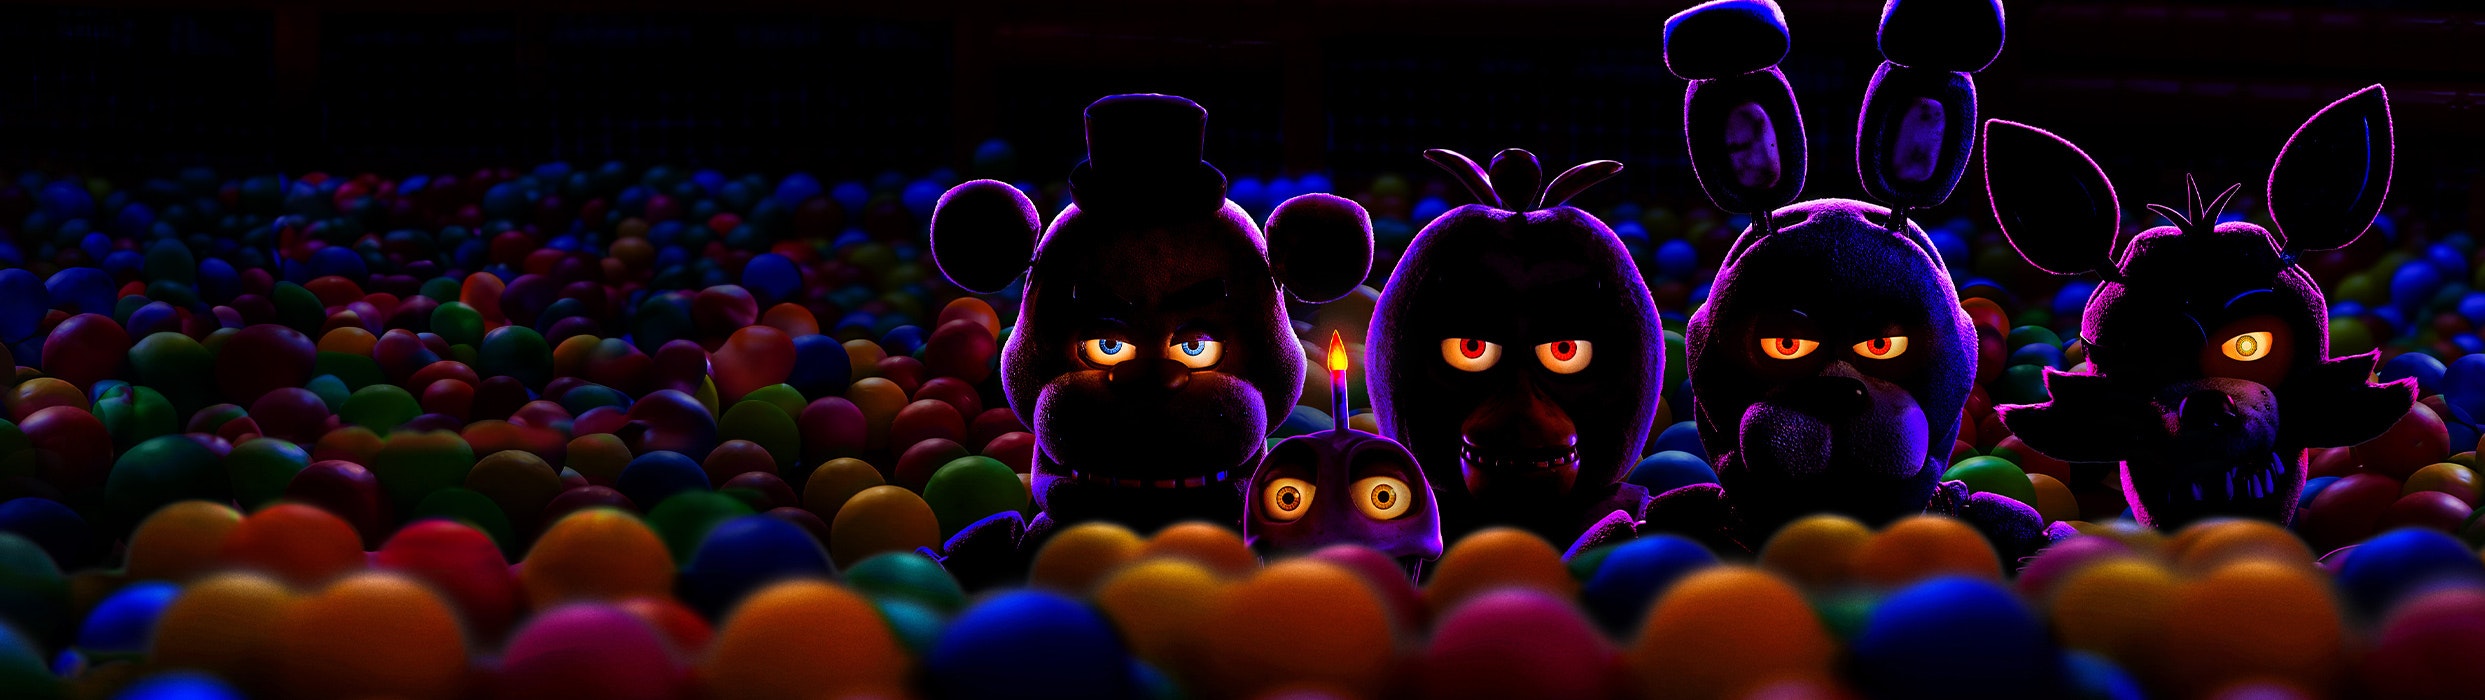 Five Nights at Freddy's - background image